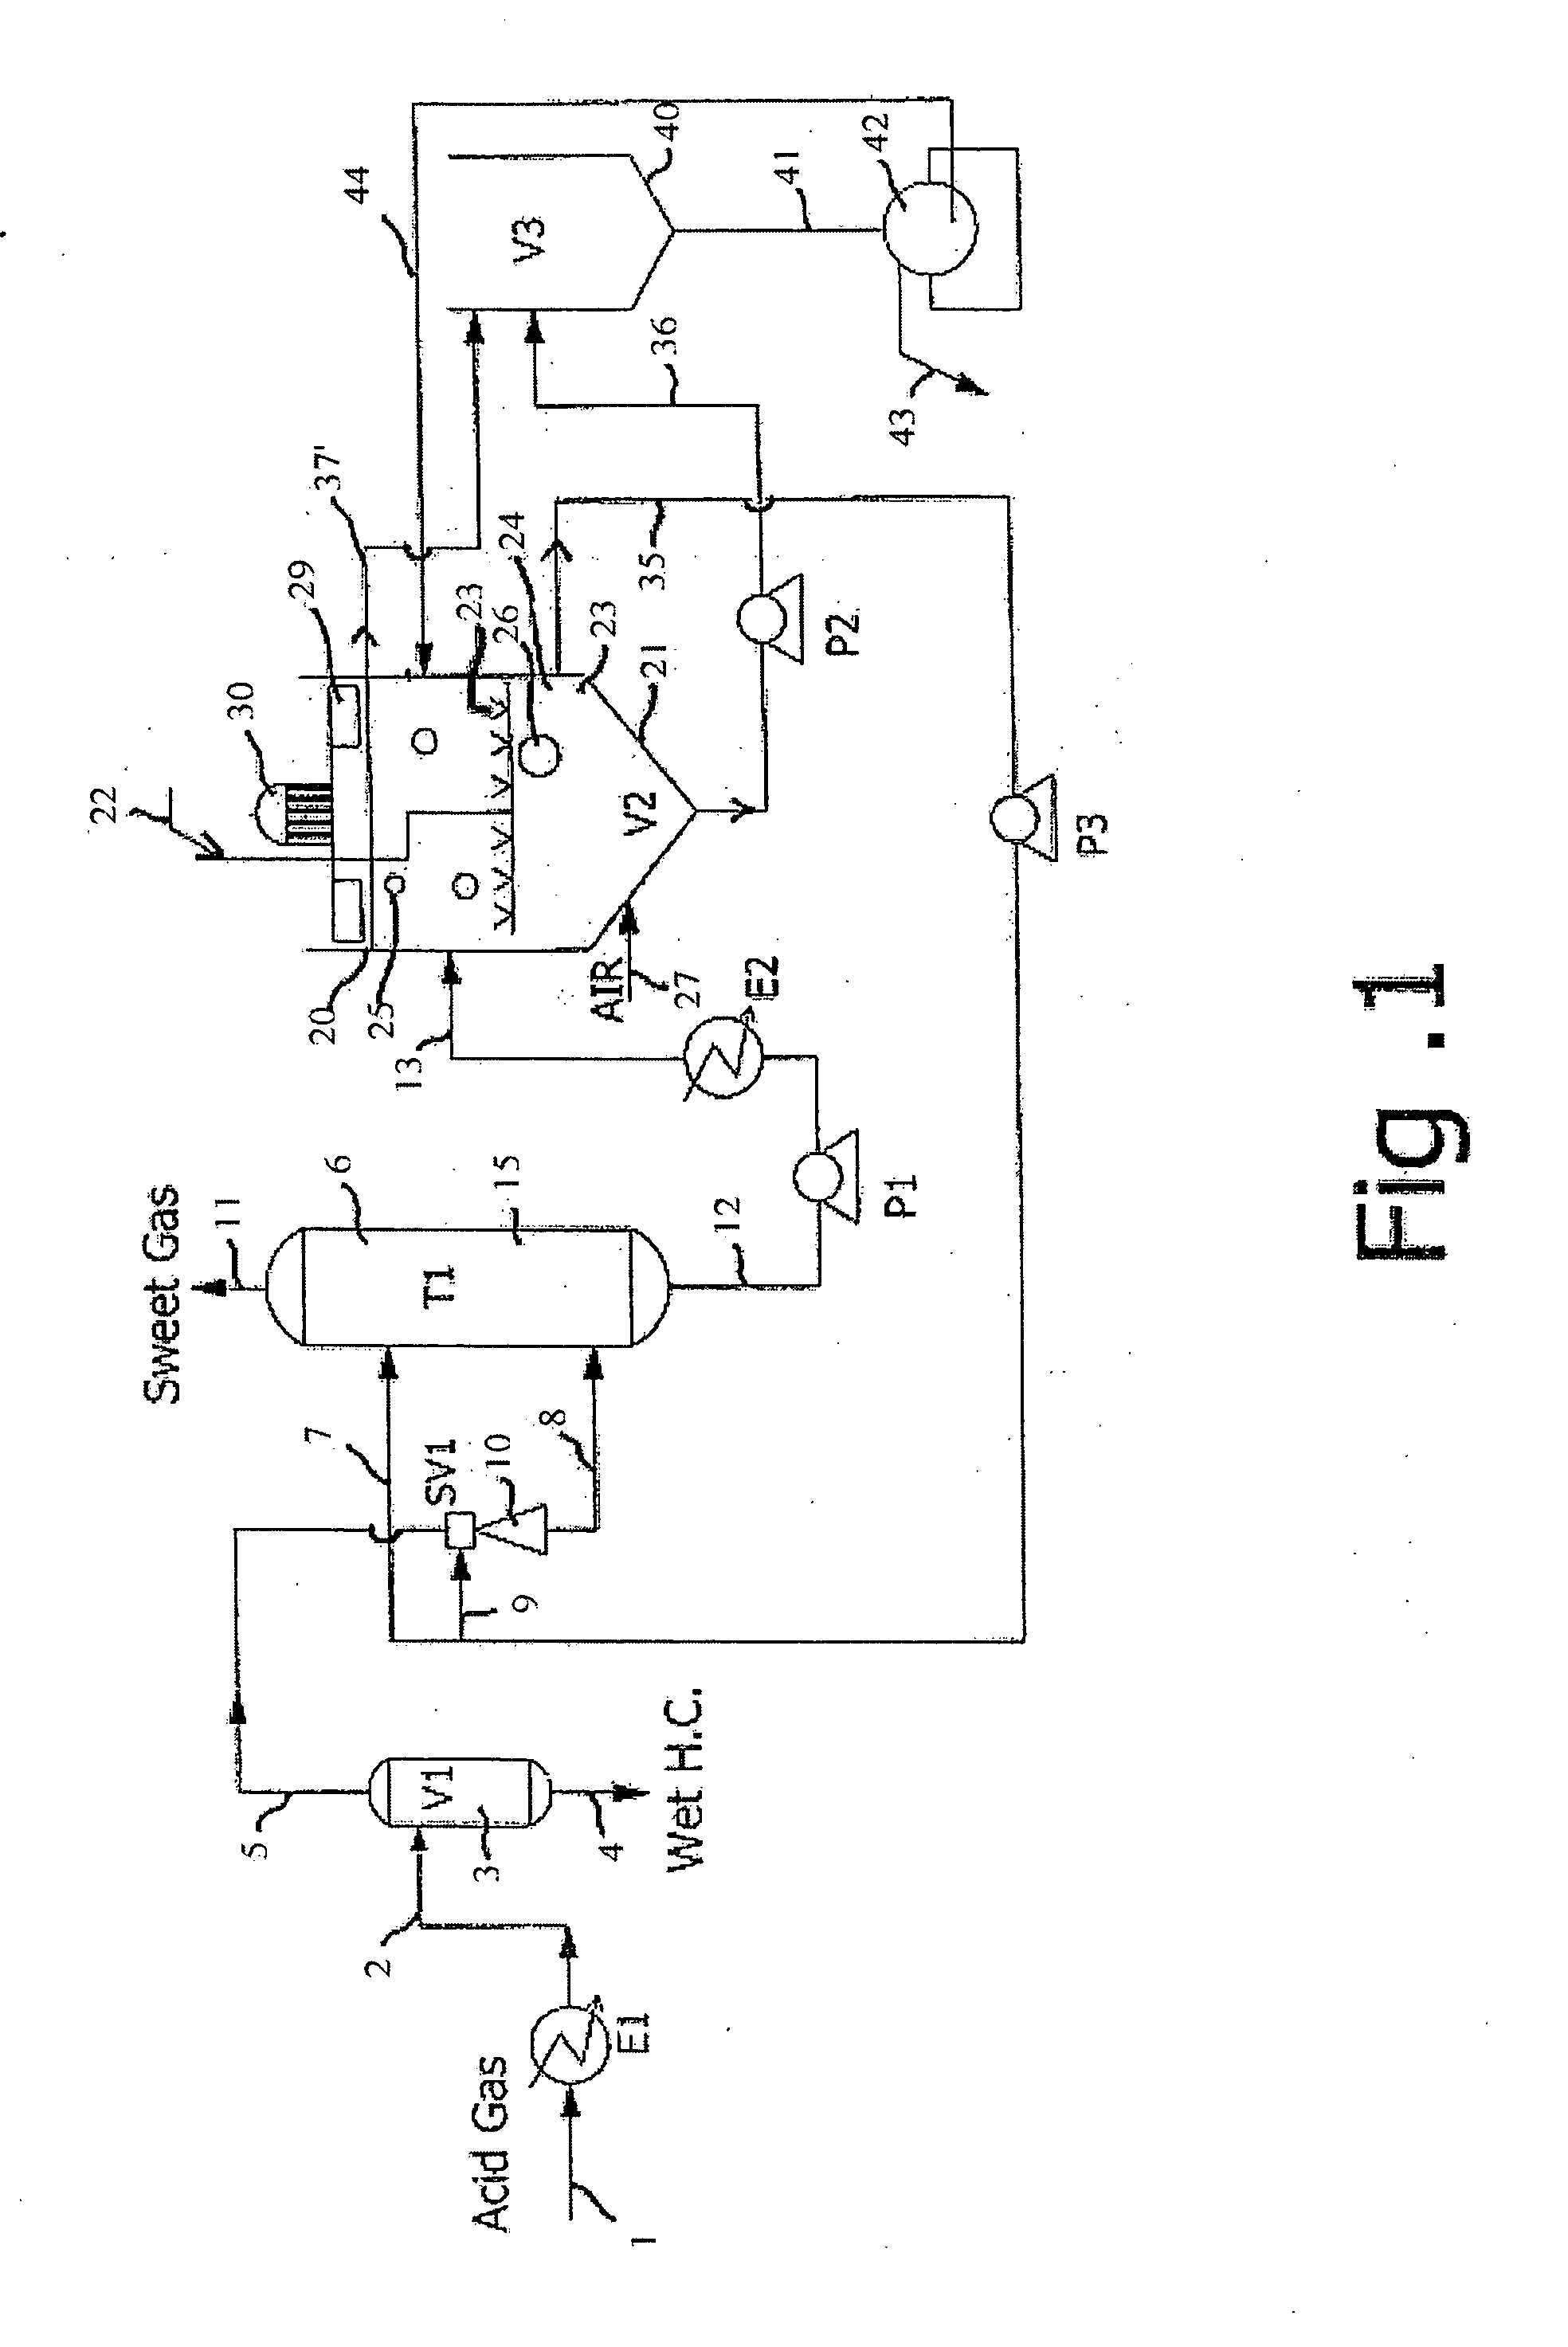 Process for removing sulfur particles from an aqueous catalyst solution and for removing hydrogen sulfide and recovering sulfur from a gas stream